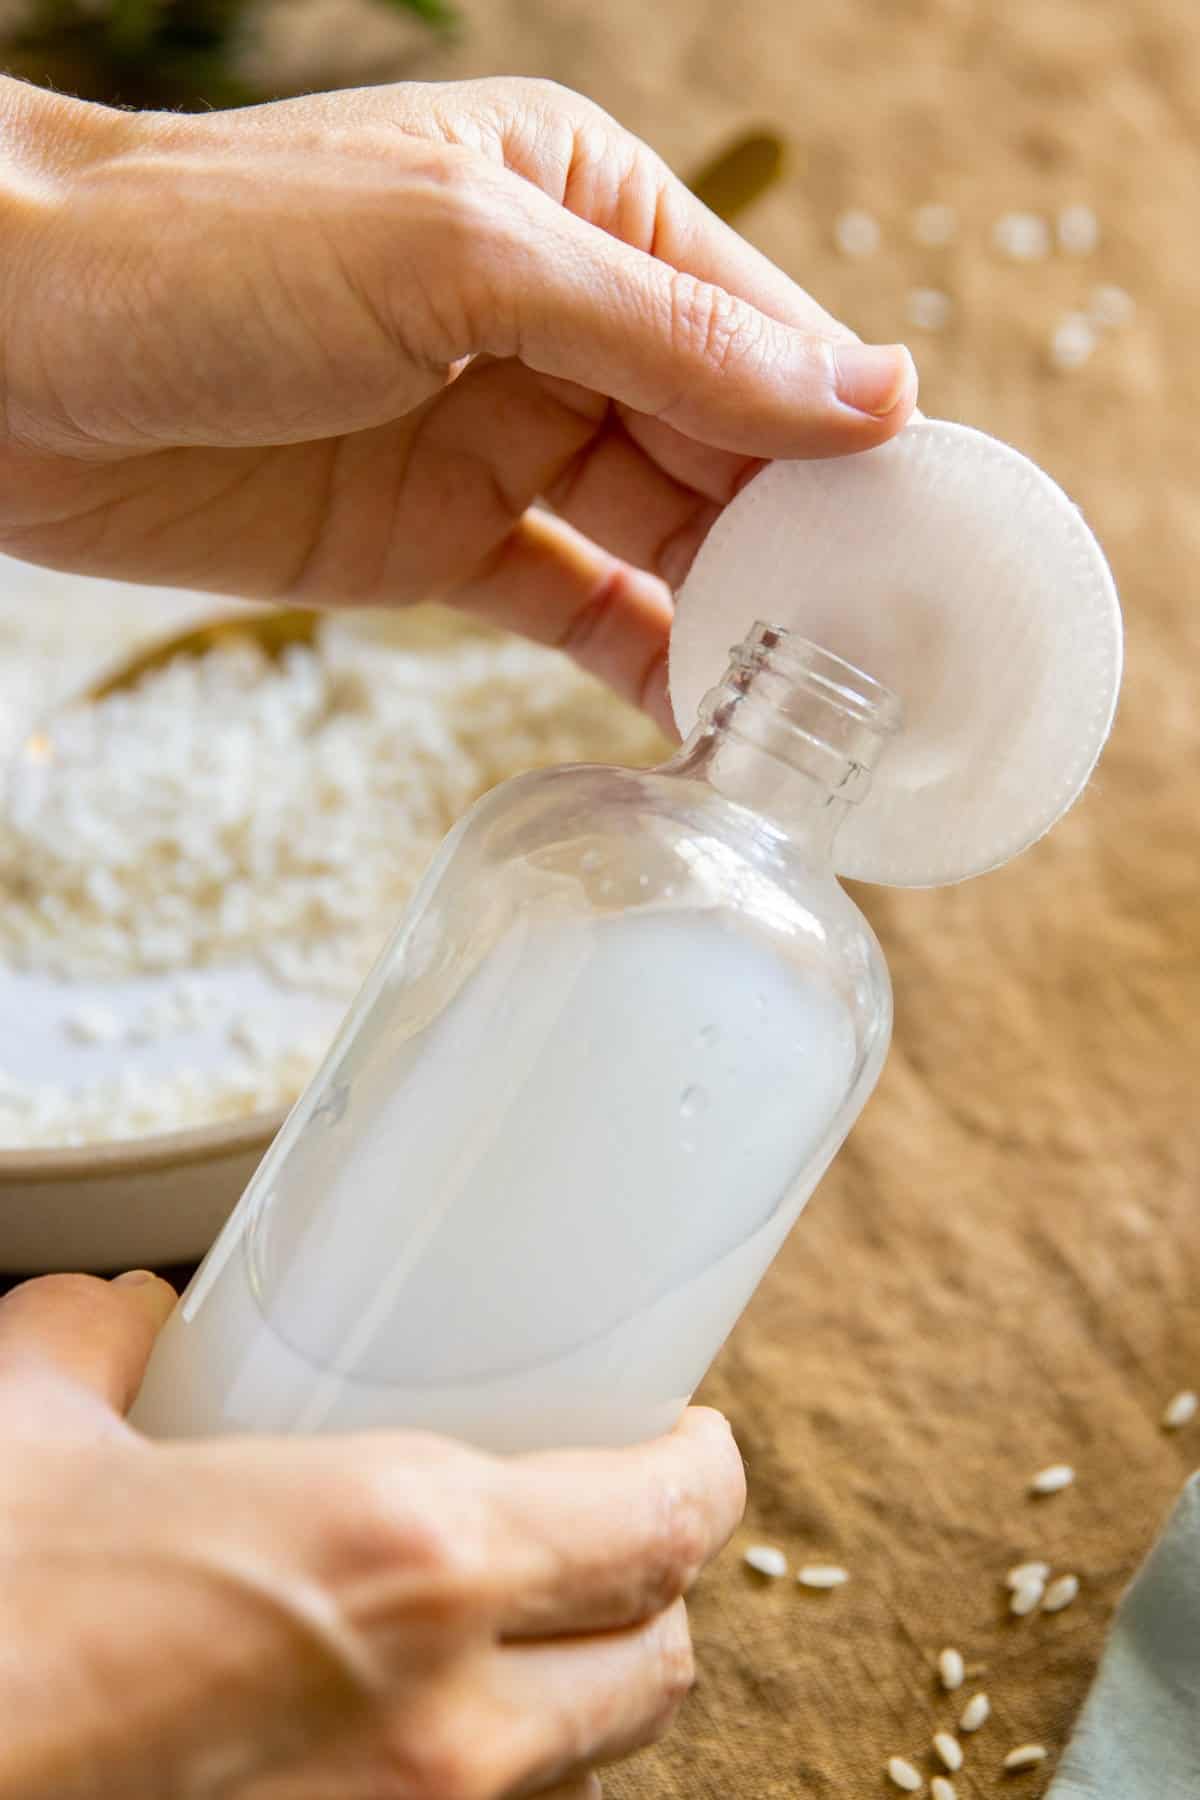 How to use homemade rice water toner